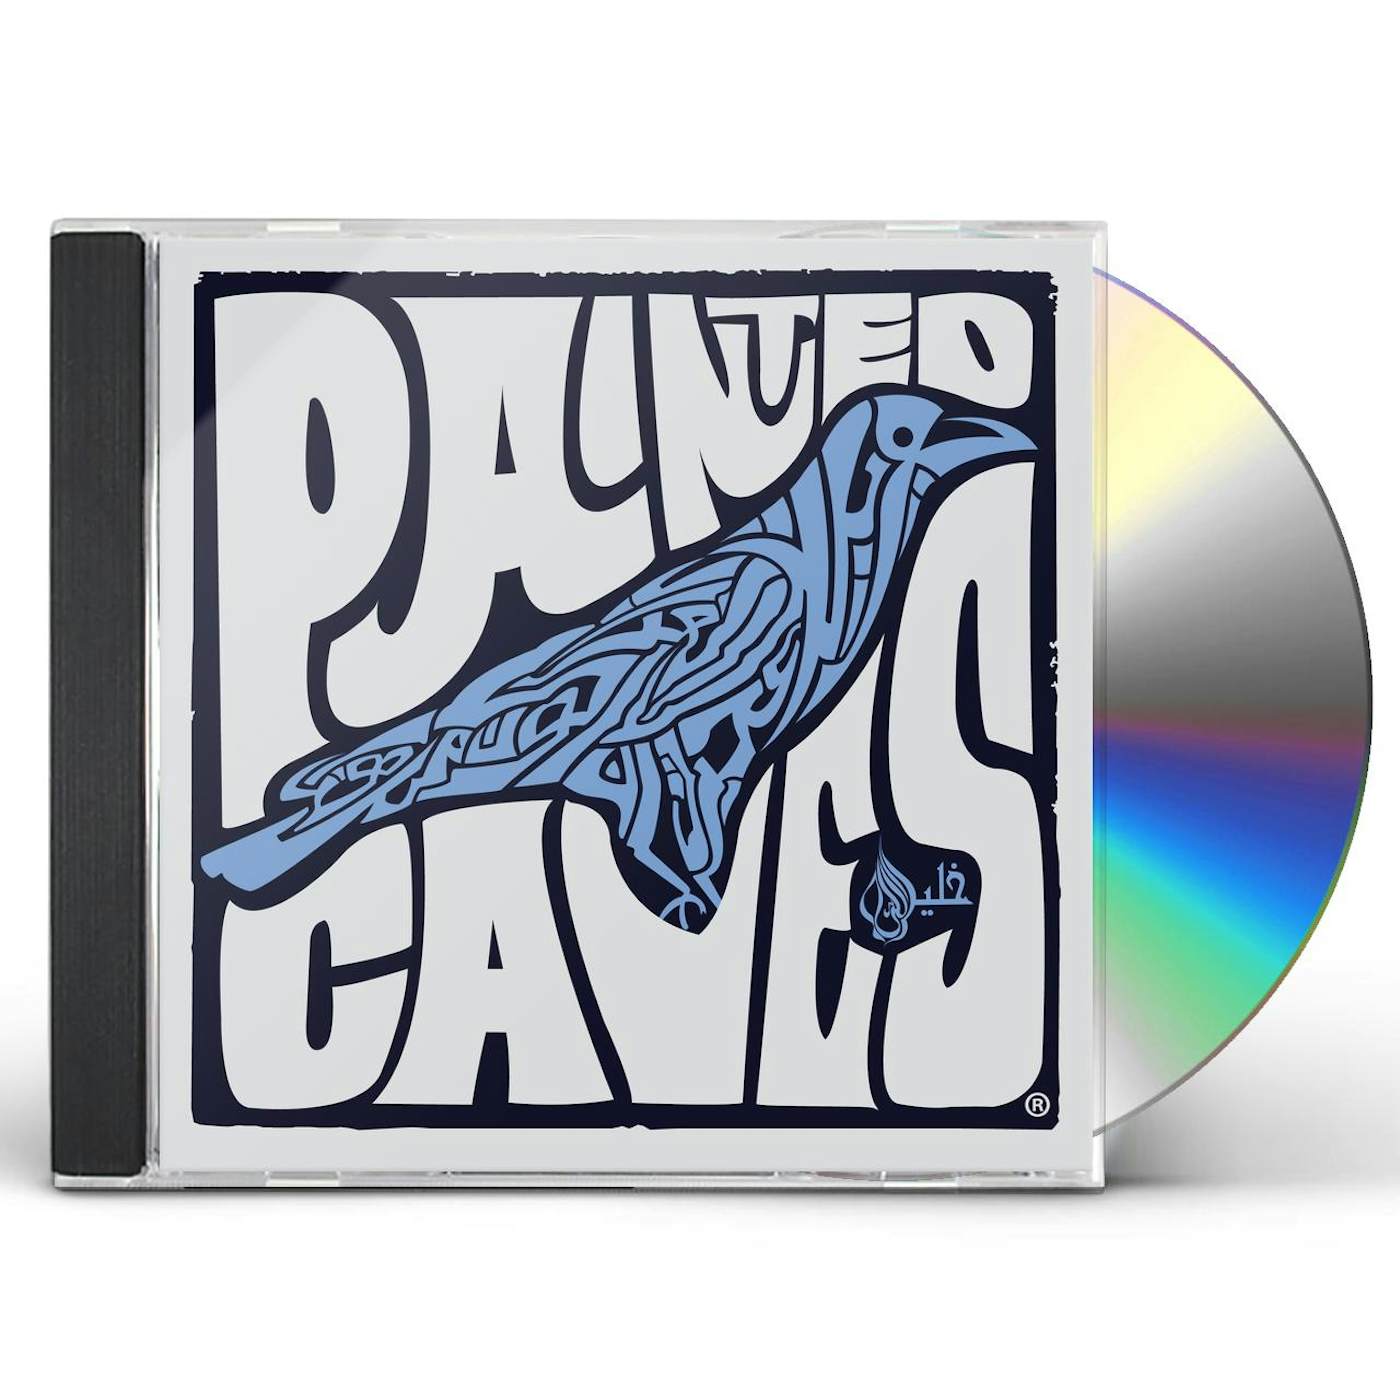 PAINTED CAVES CD